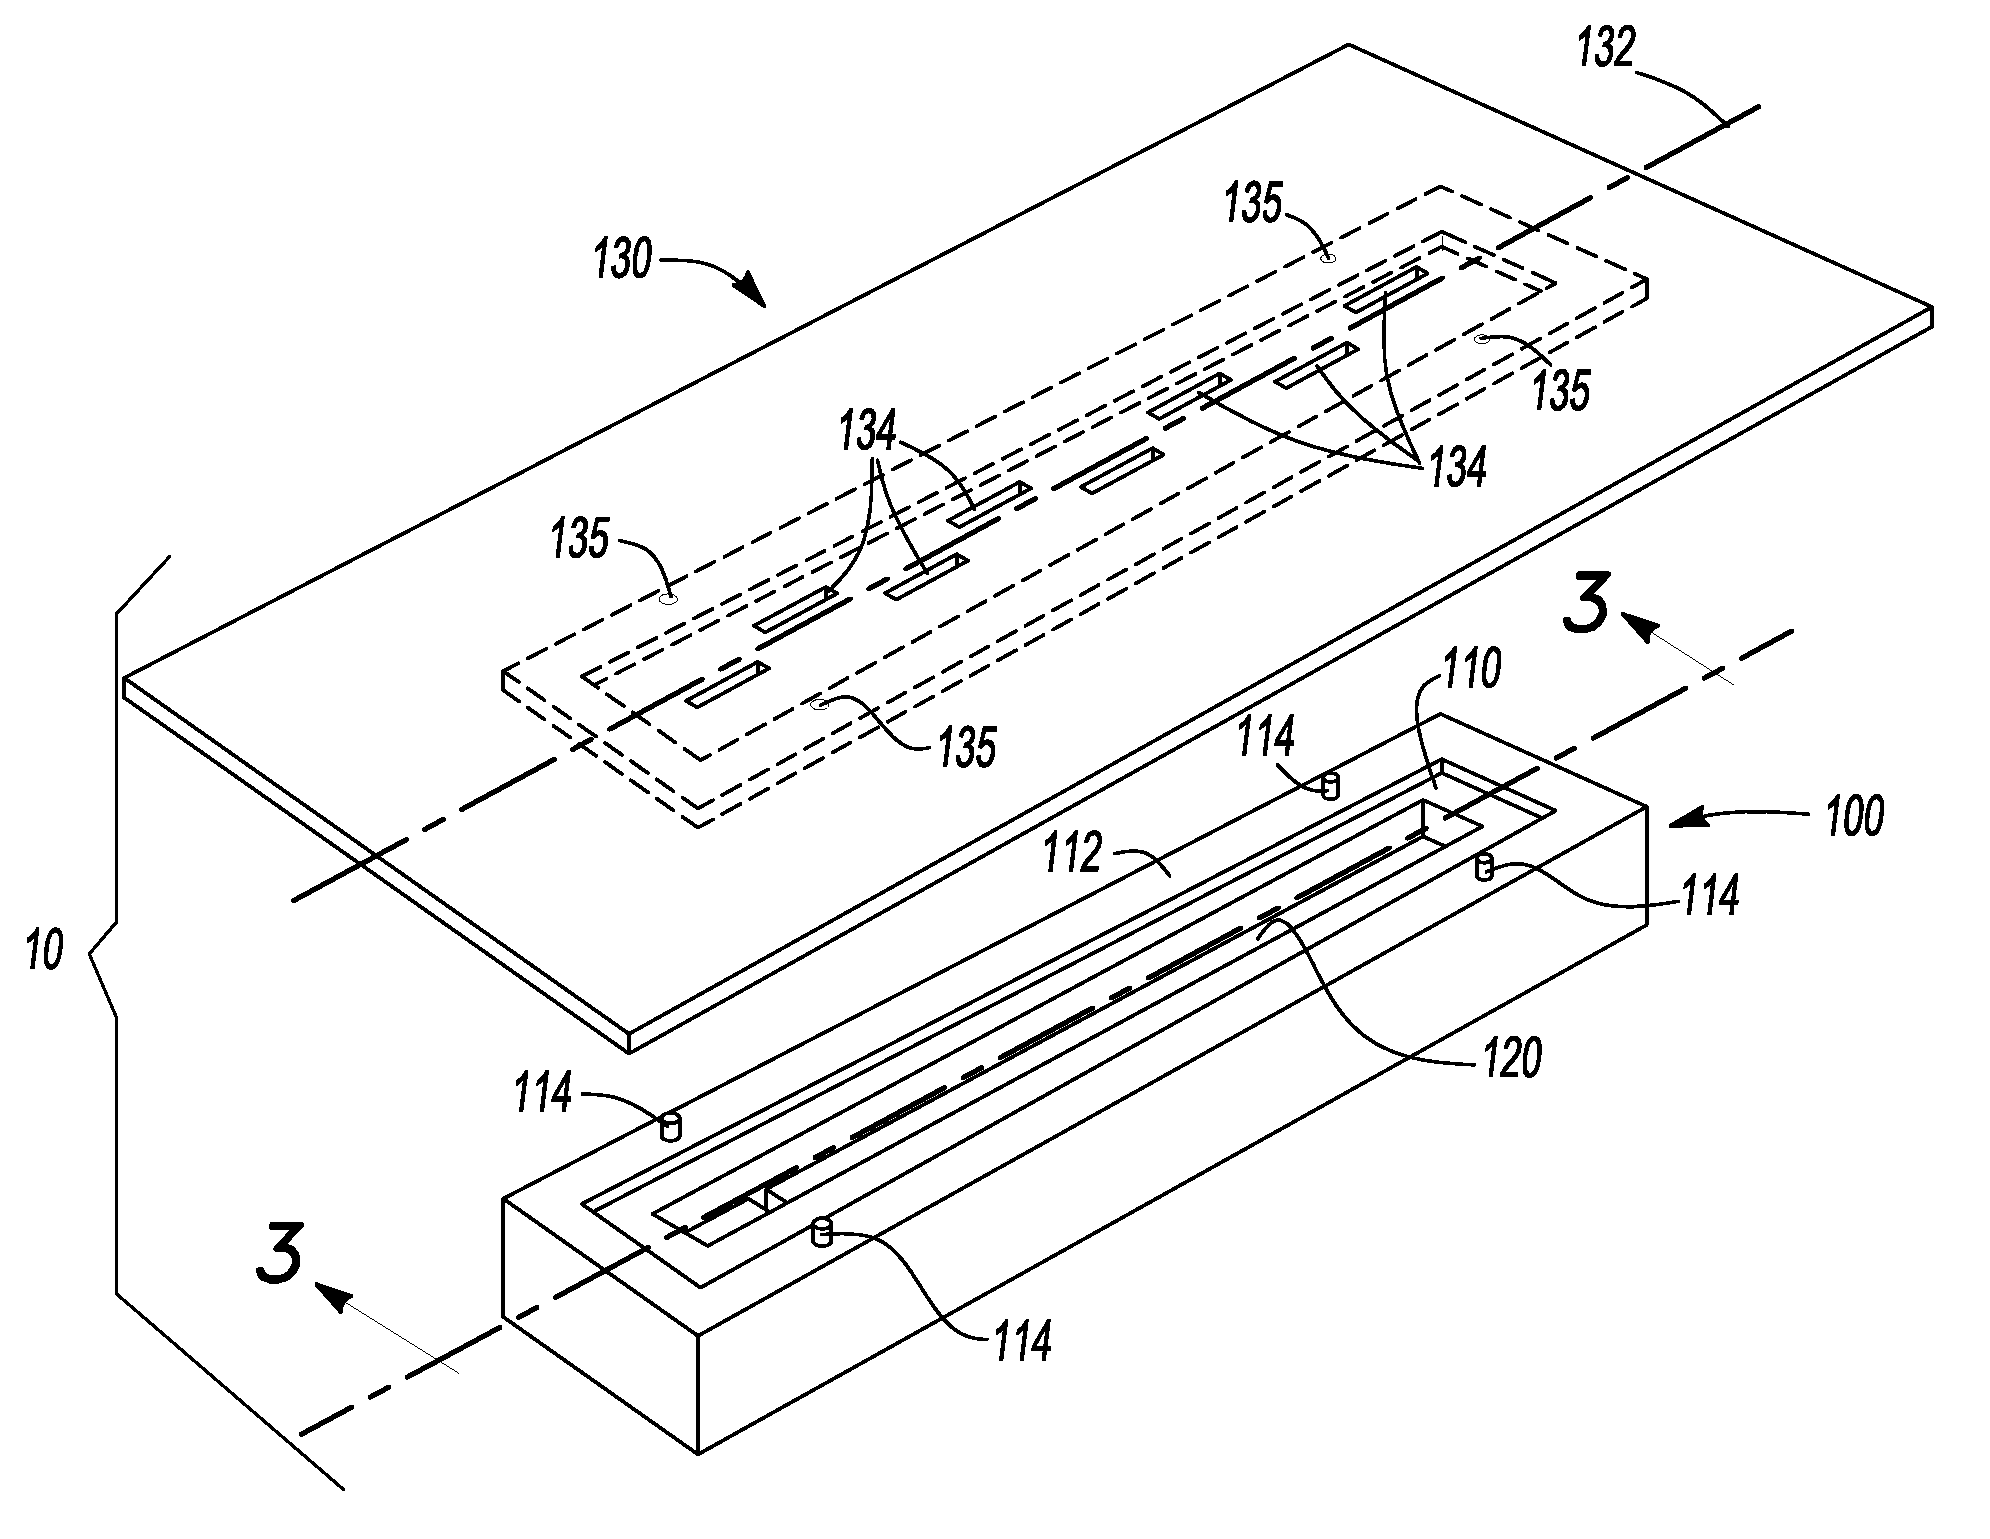 Plastic waveguide slot array and method of manufacture